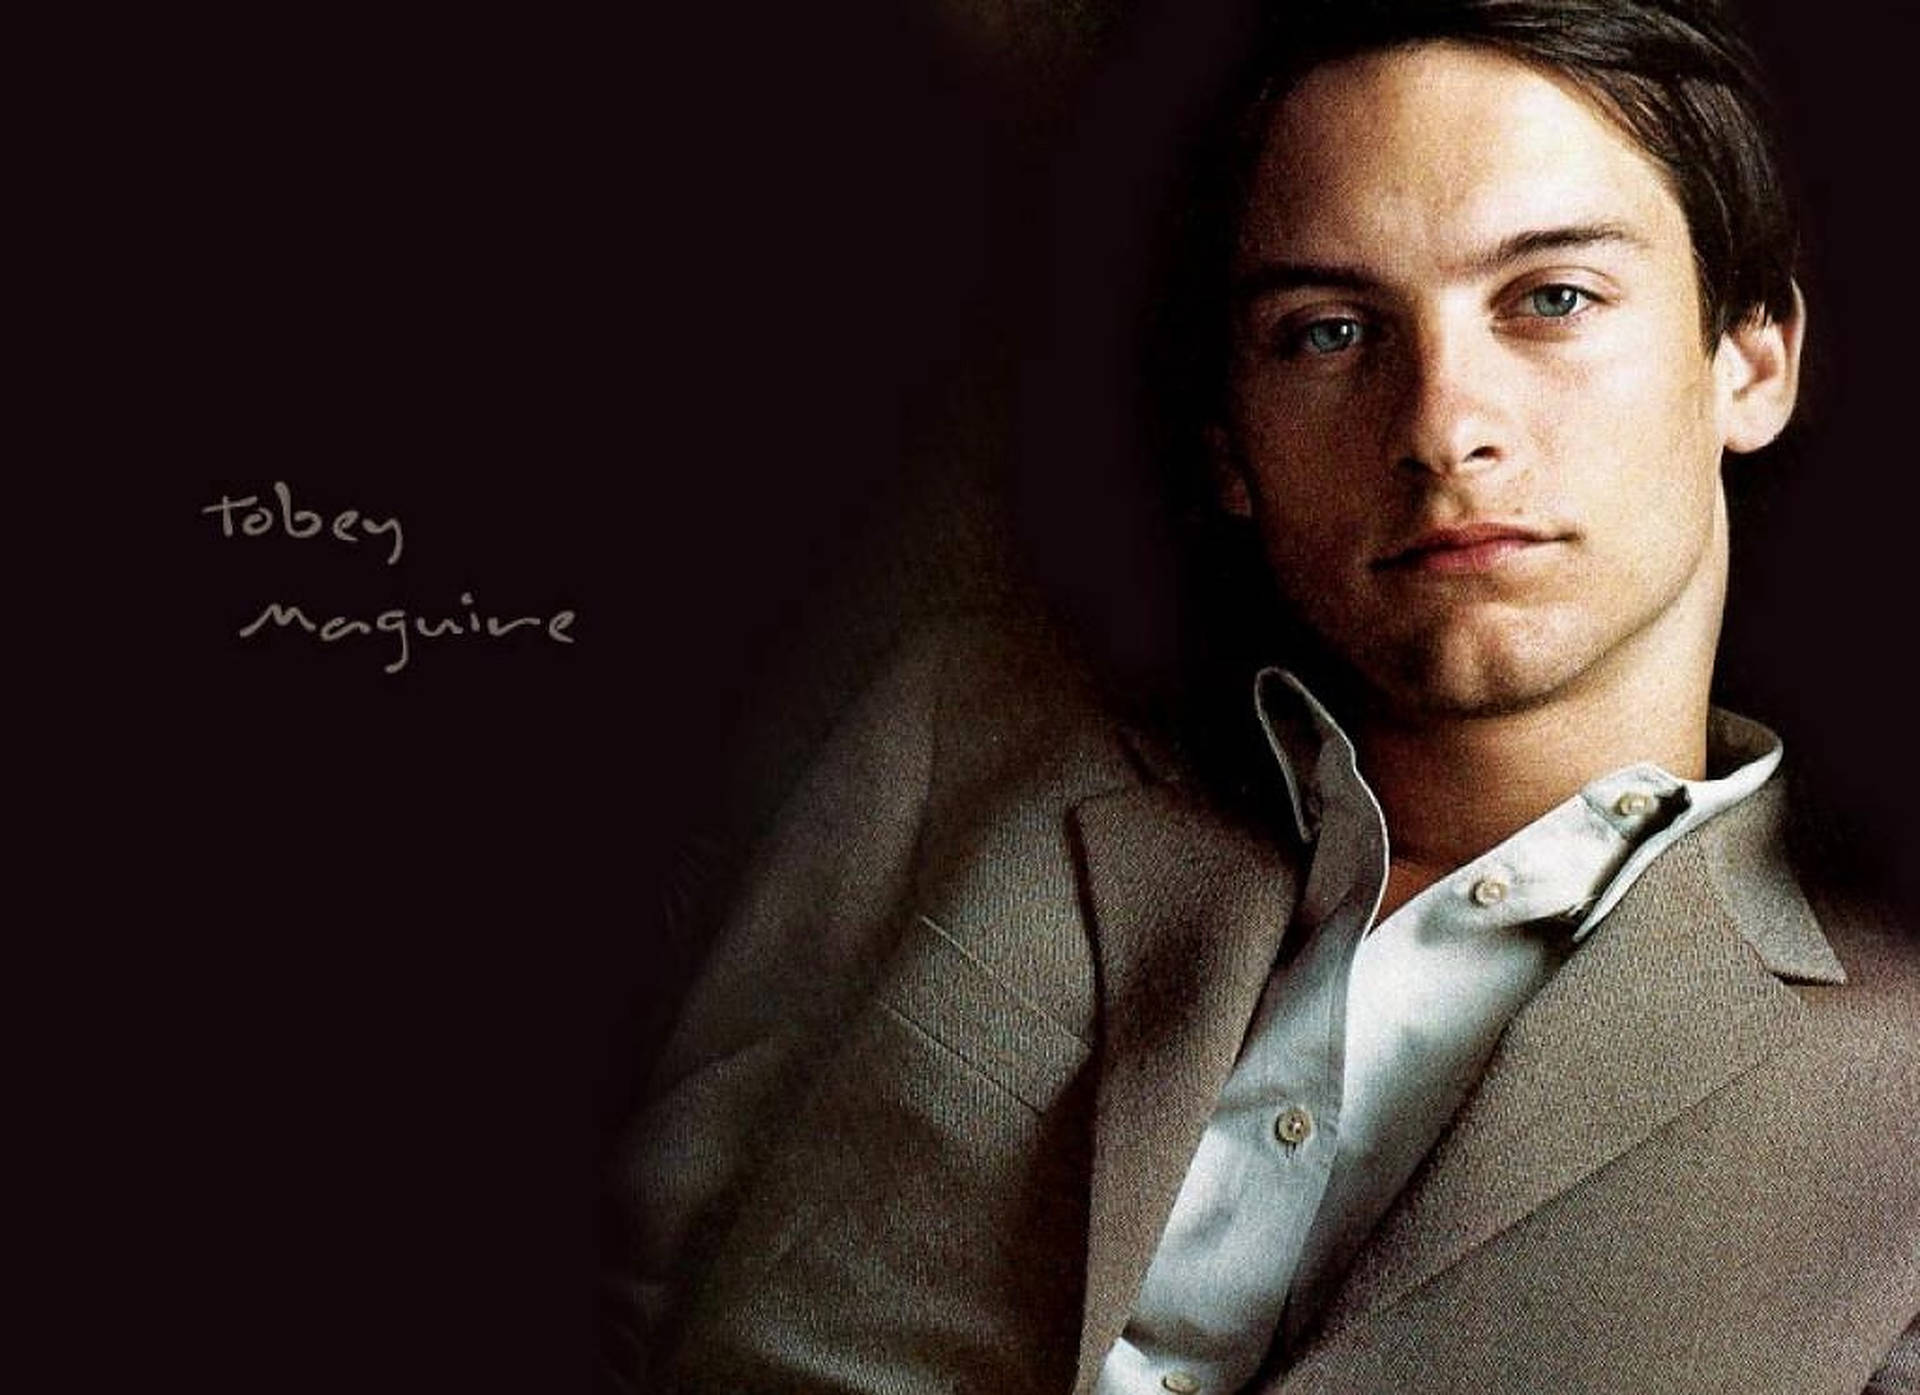 Tobey Maguire Photo Session Wallpaper